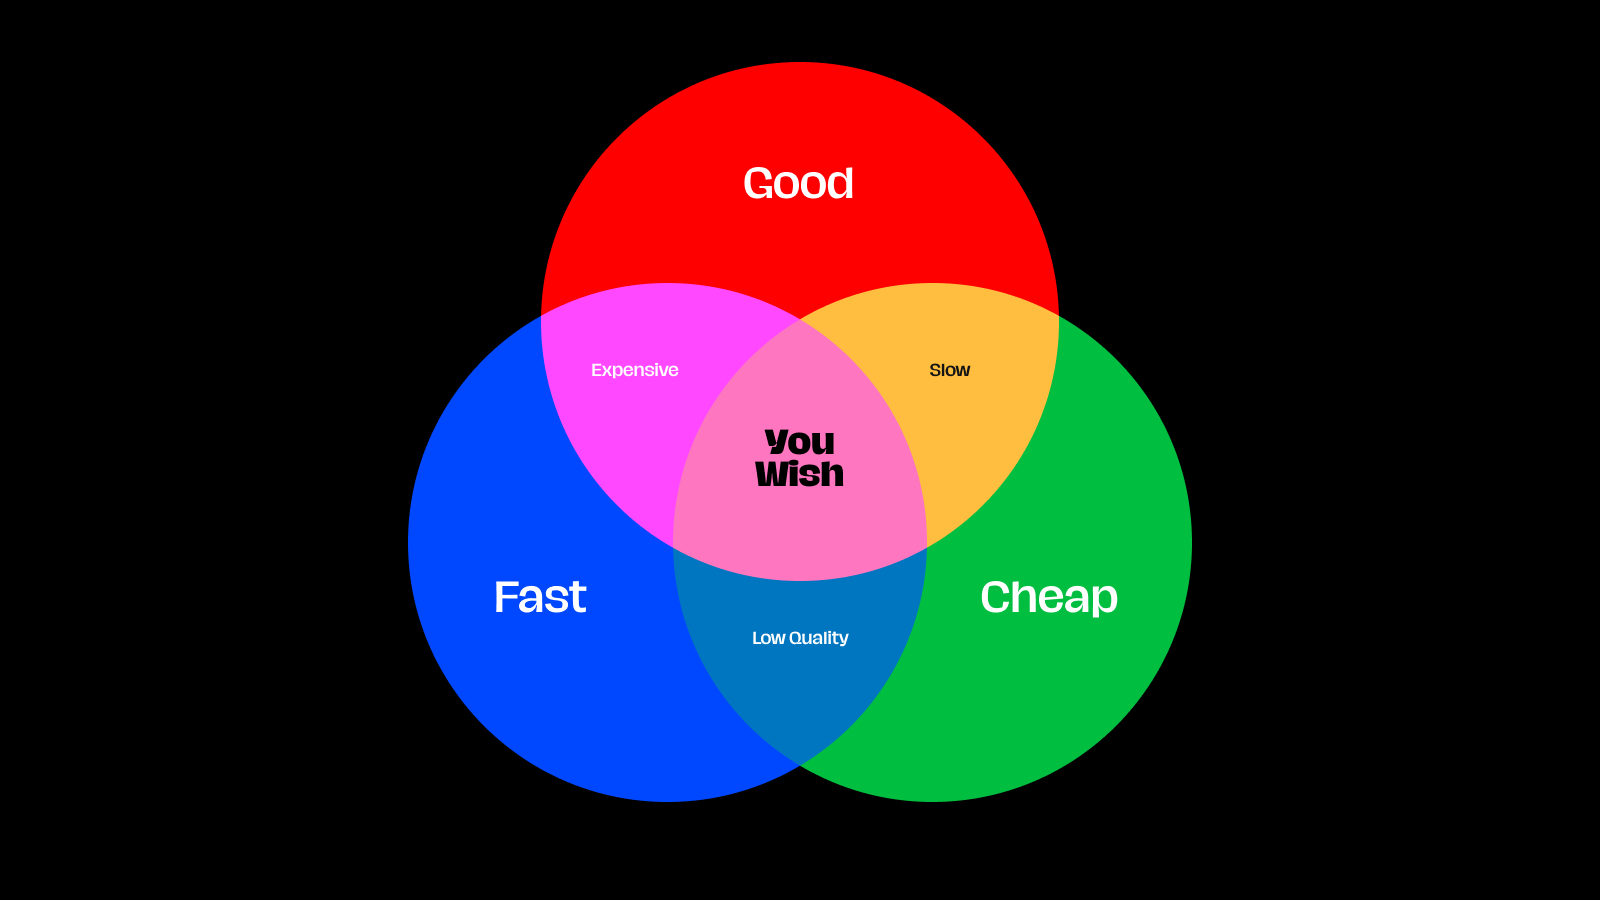 A Venn diagram of three circles: Good, Fast, and Cheap. The combination of Good and Fast is Expensive. The combination of Good and Cheap is Slow. The combination of Cheap and Fast is Low Quality. The combination of all three is You Wish.